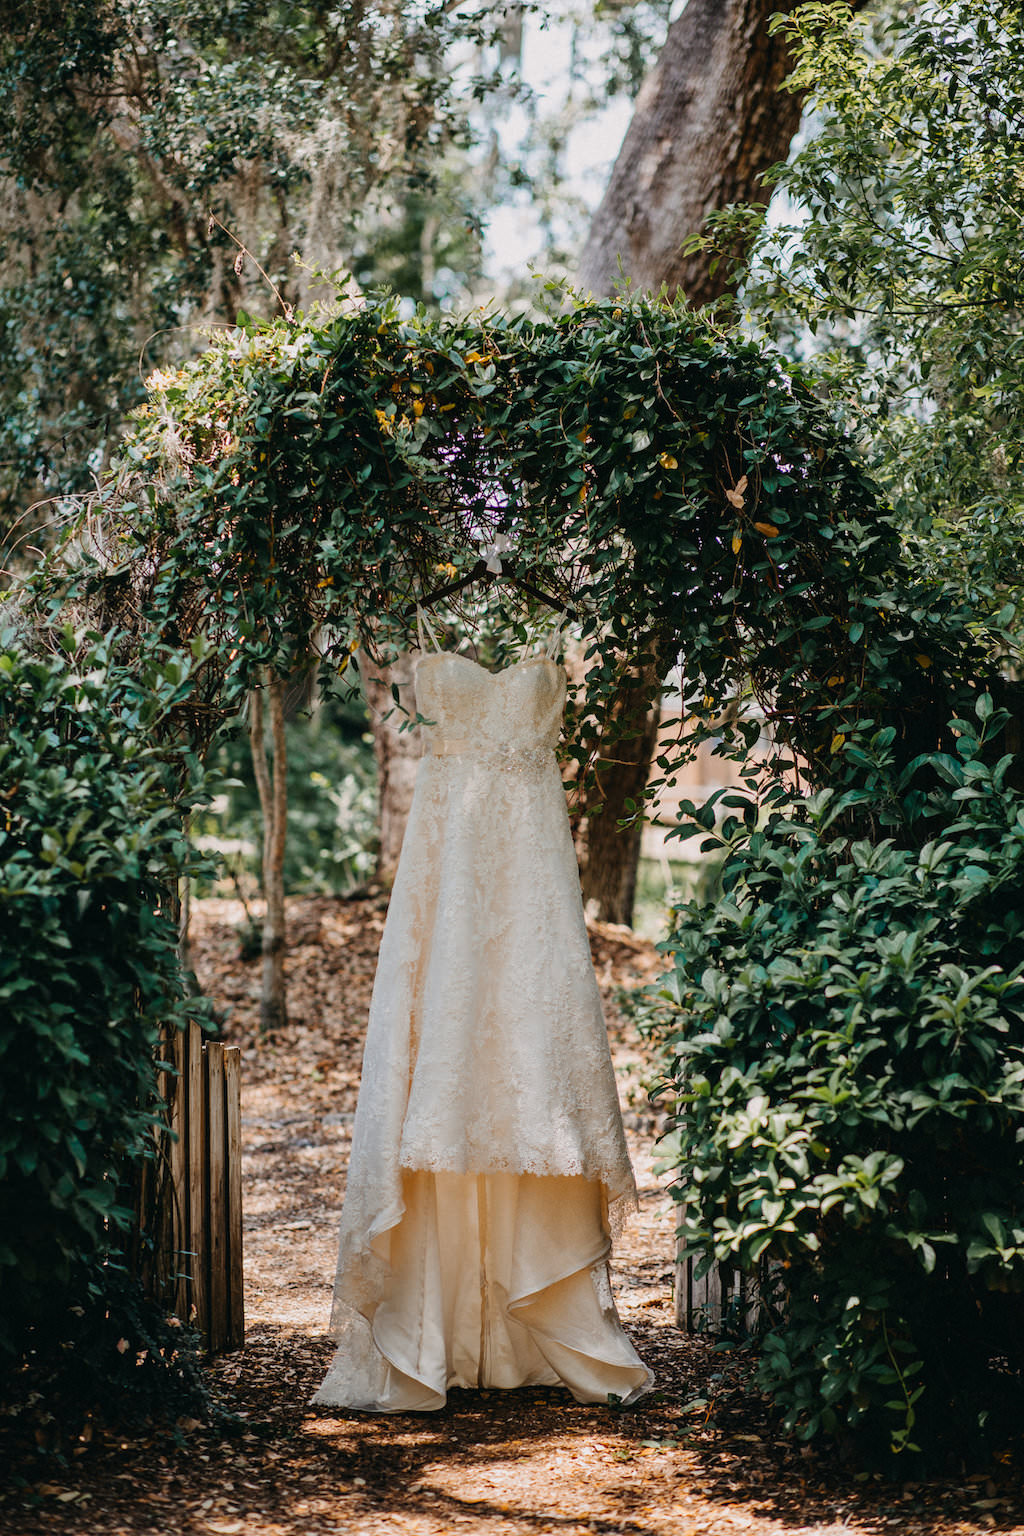 Strapless Sweetheart Neck Line Lace Wedding Dress Hanging Outside on Greenery Arch Doorway | Tampa Bay Photographer Rad Red Creative